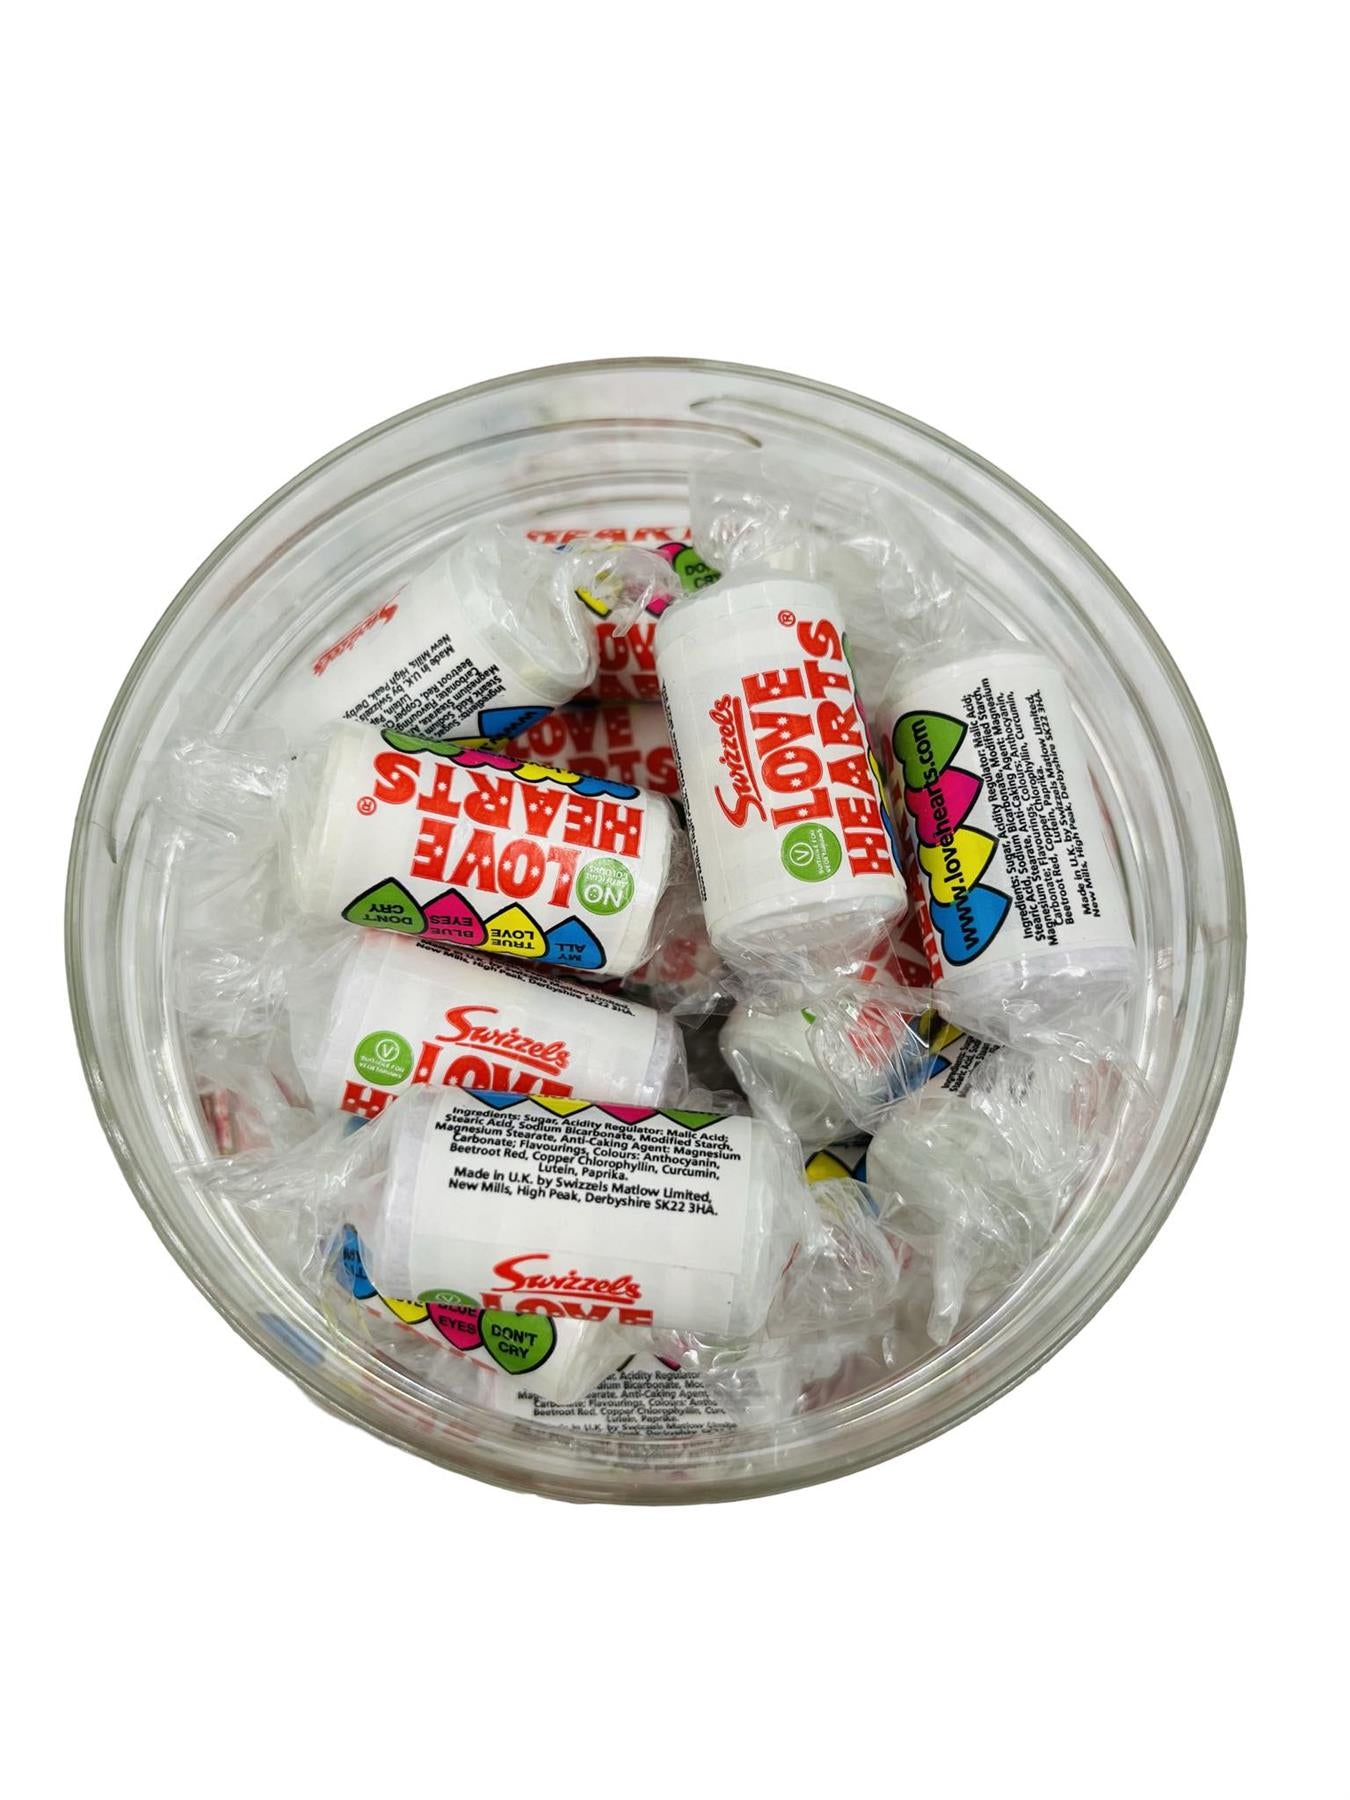 Simway Sweets Jar 665g - Swizzels Love Heart Rolls - Individually Wrapped Sweets - Approximately 50 Pieces